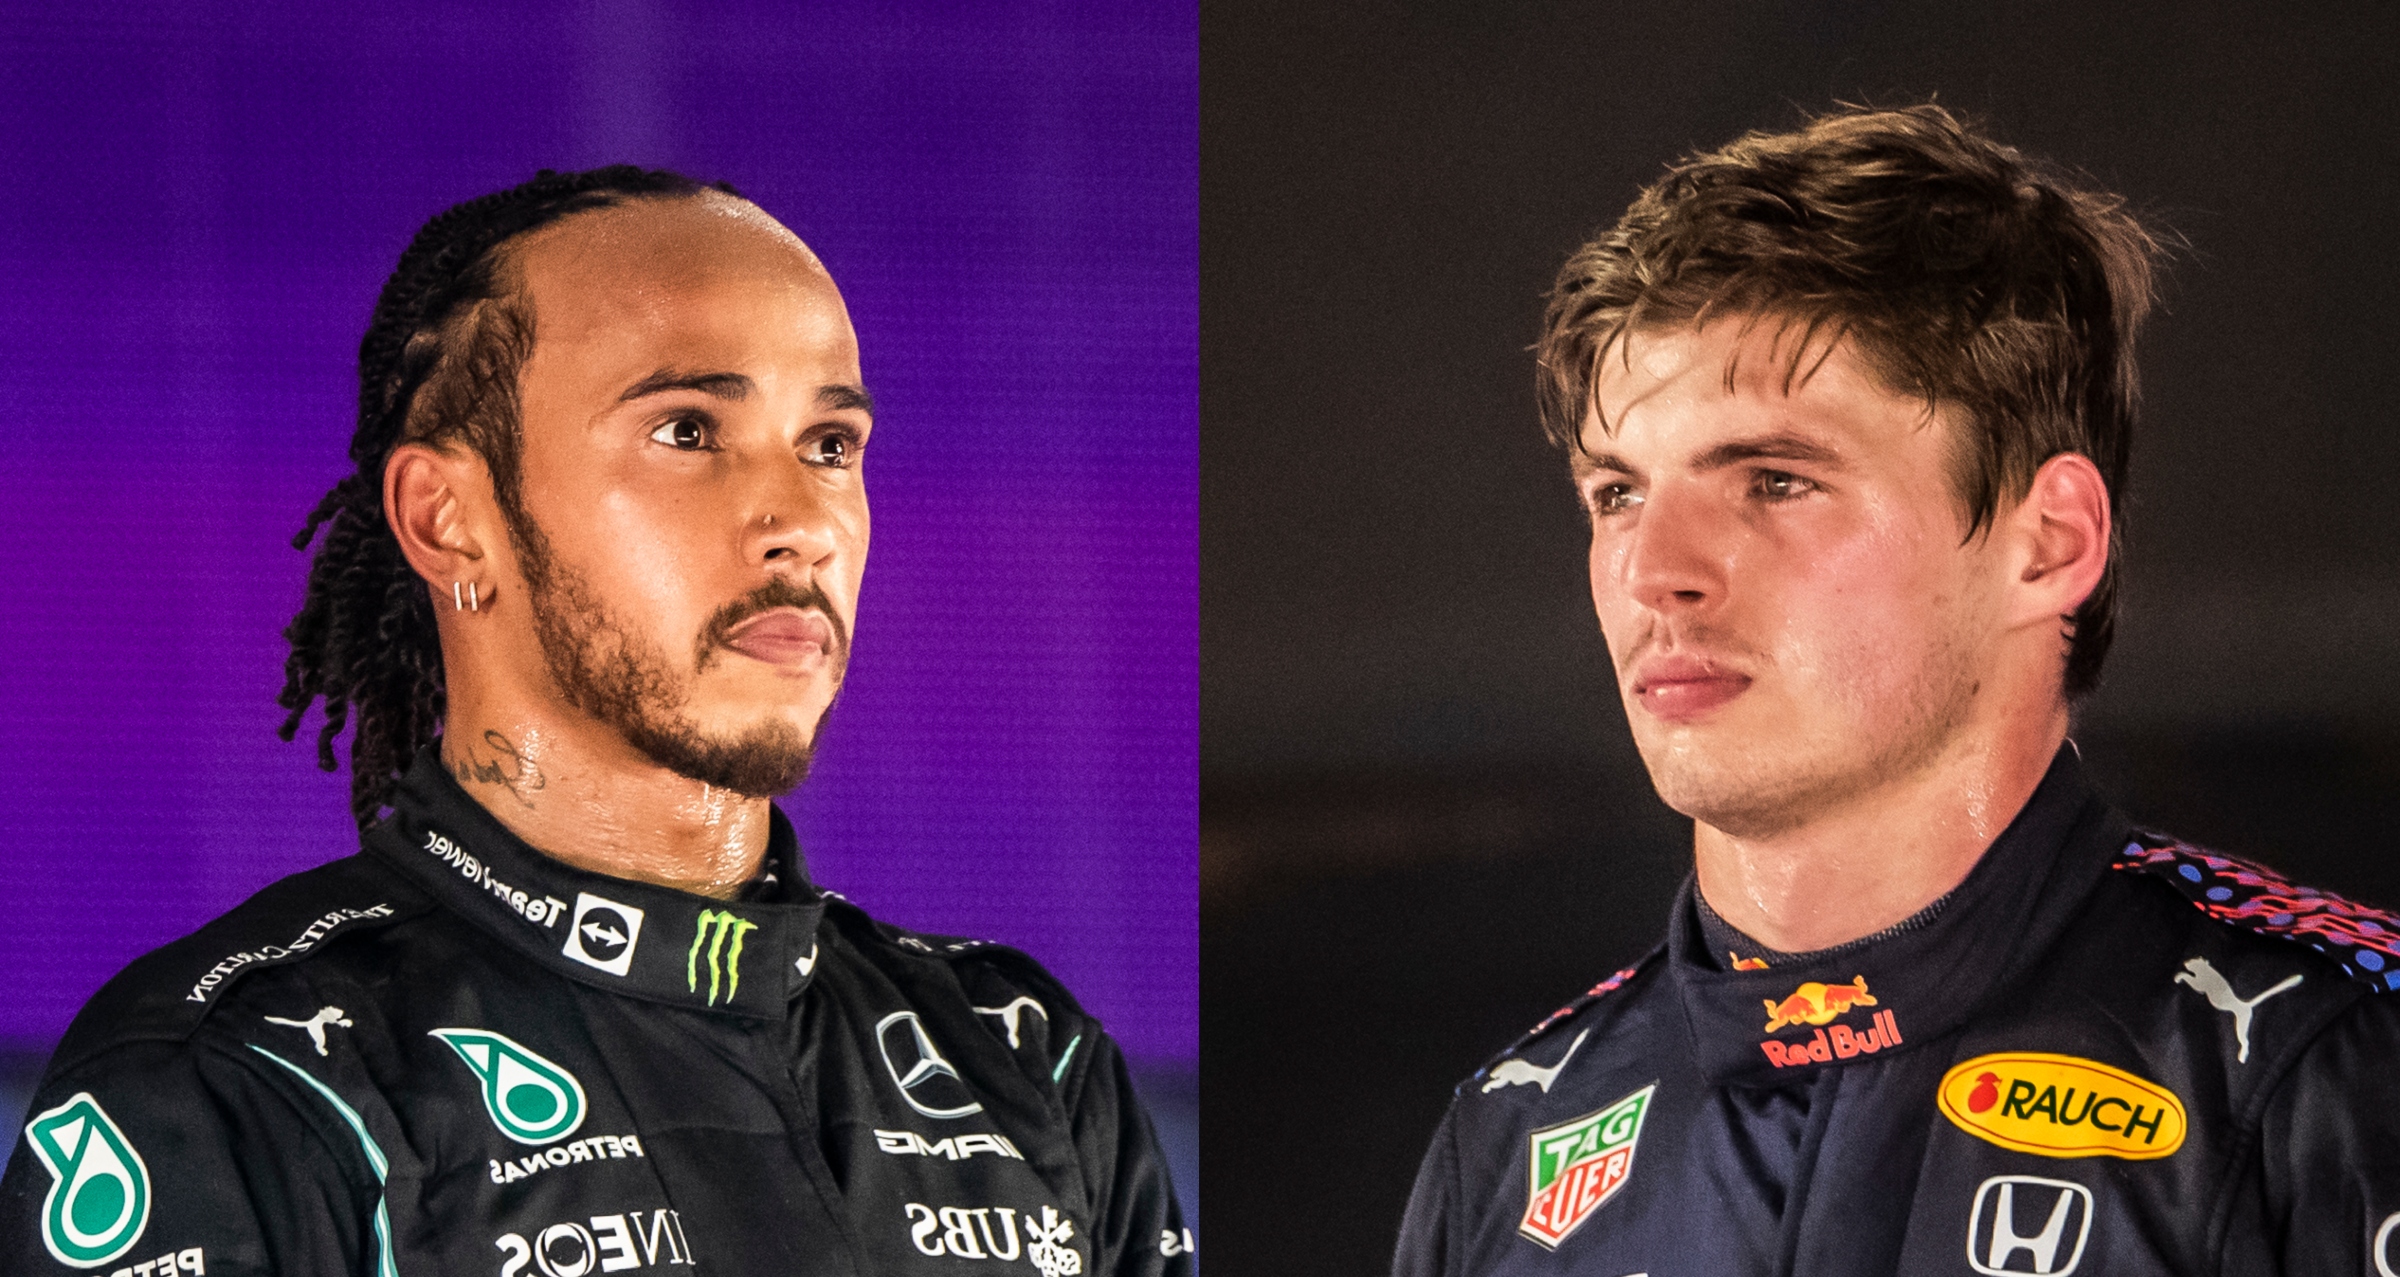 What Sunday's Abu Dhabi Grand Prix Race Means For Hamilton And Verstappen